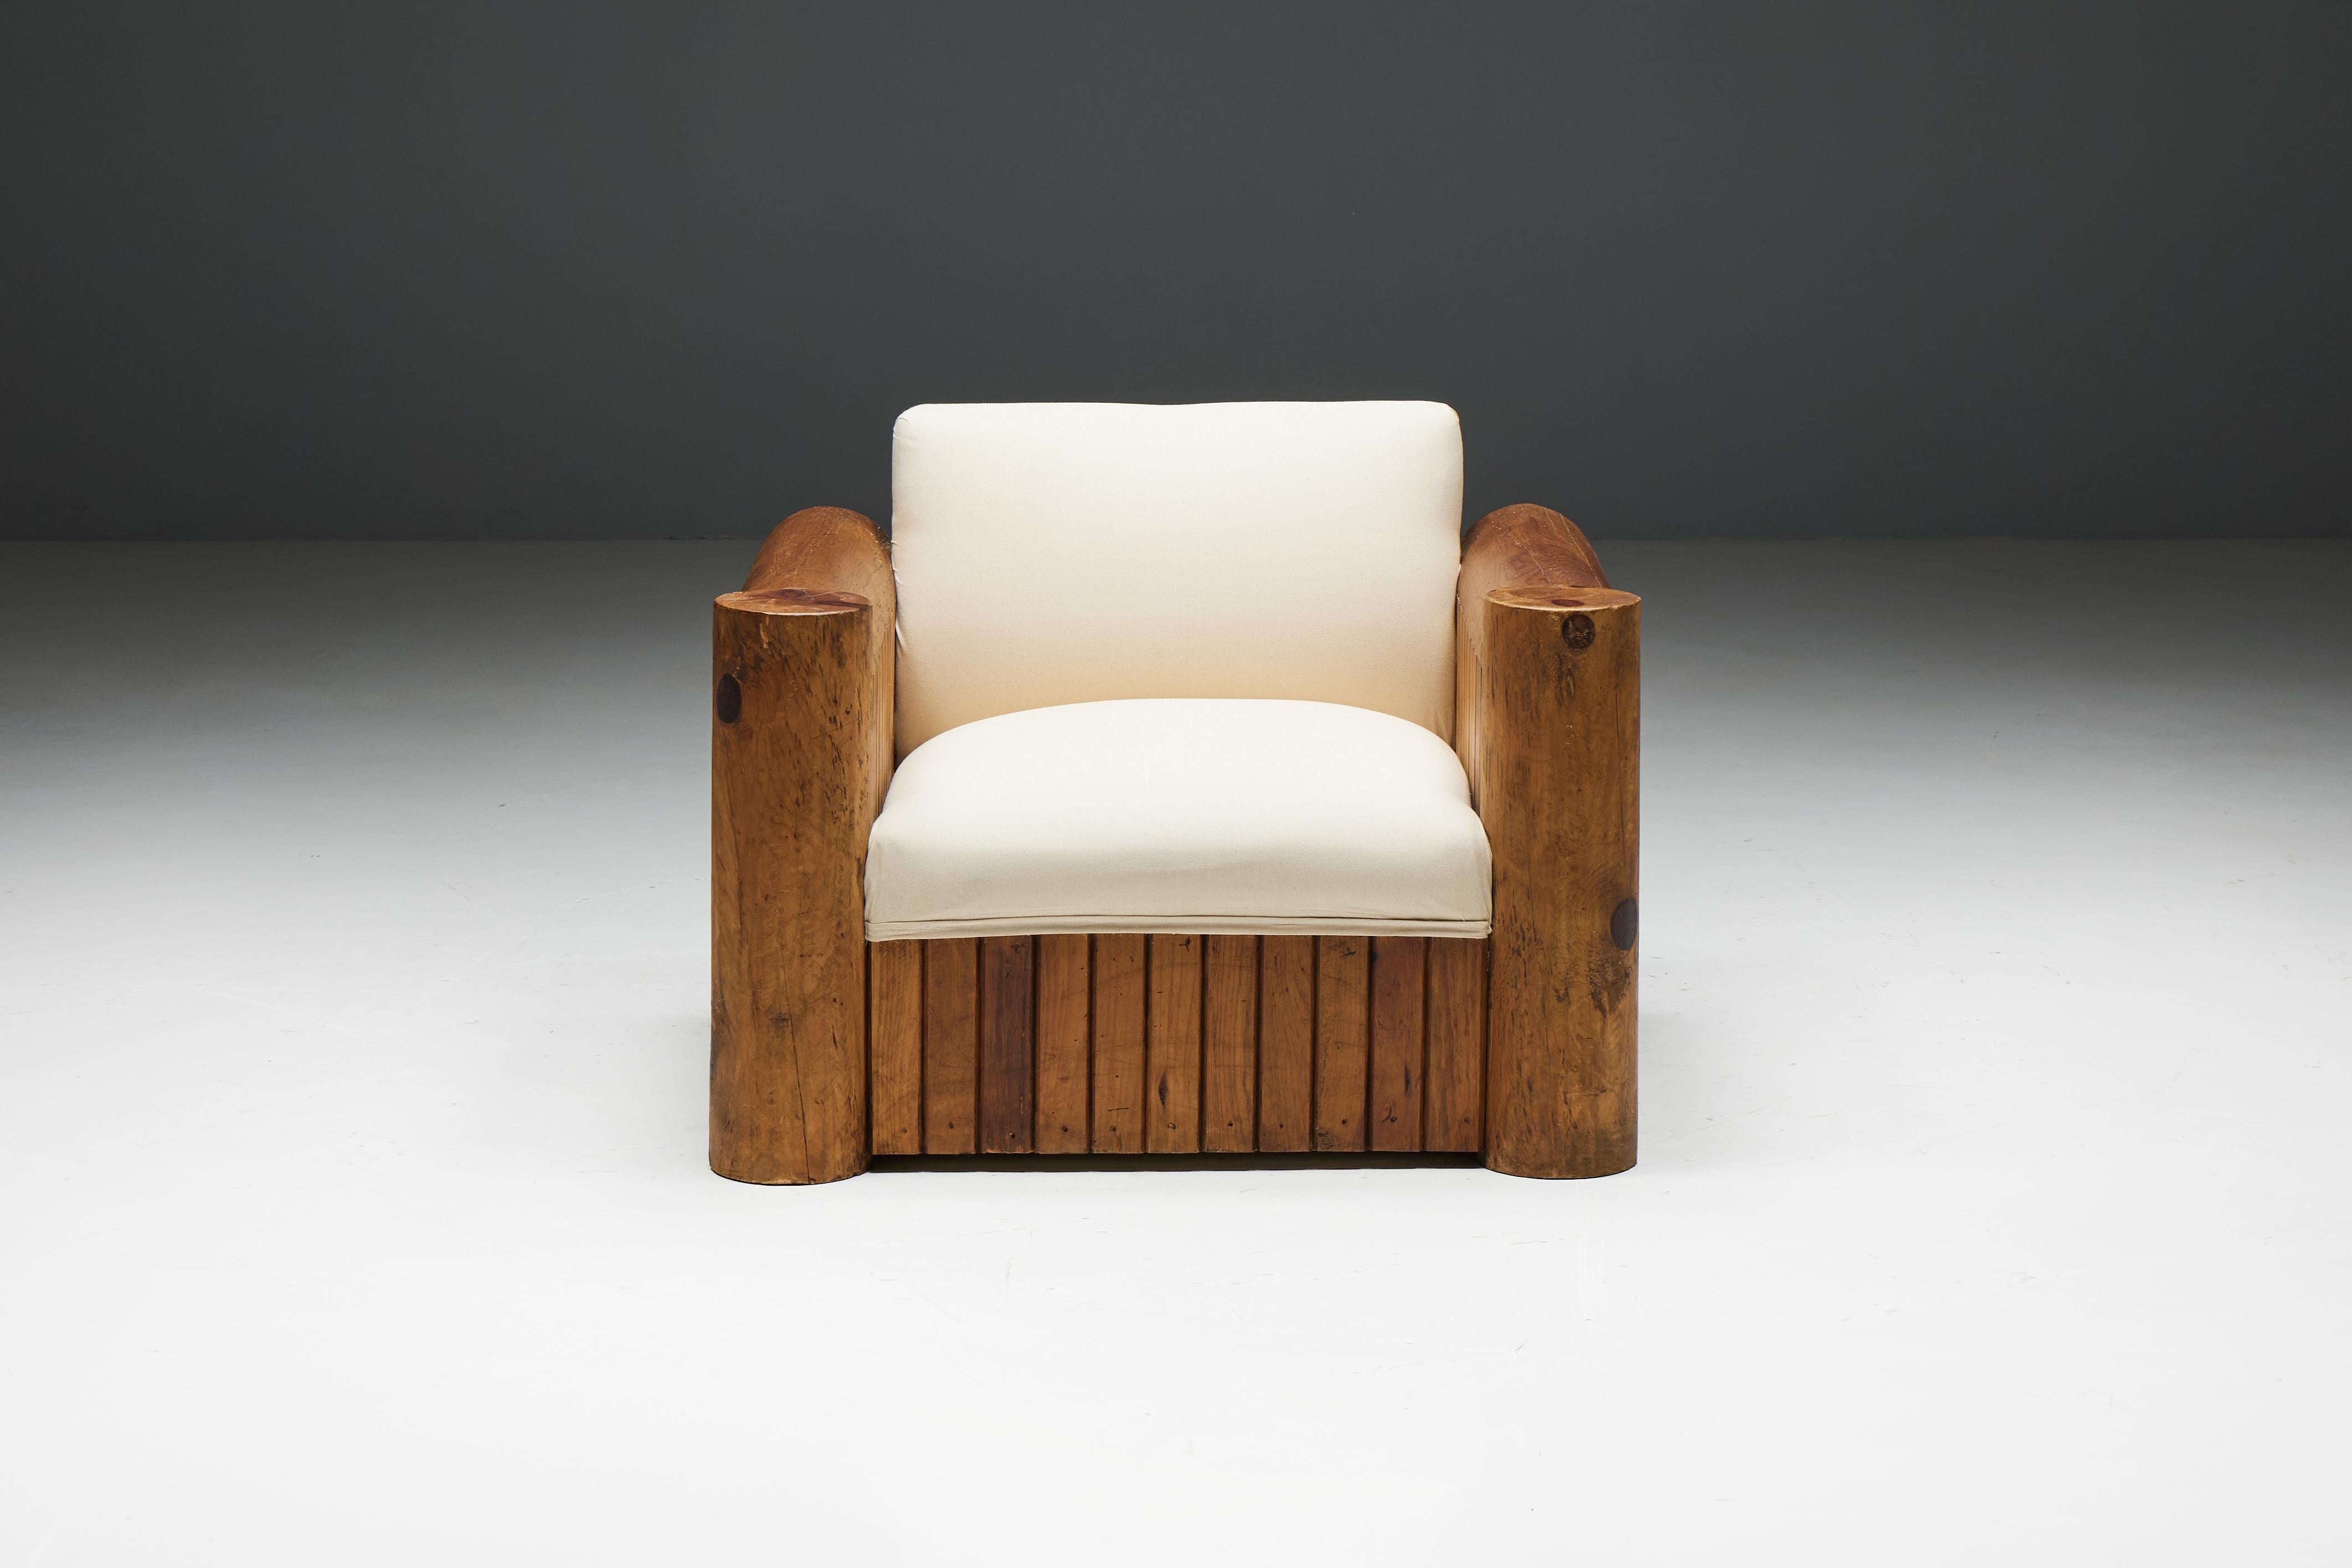 Brutalist Naive Lounge Chairs, France, 1940s For Sale 1